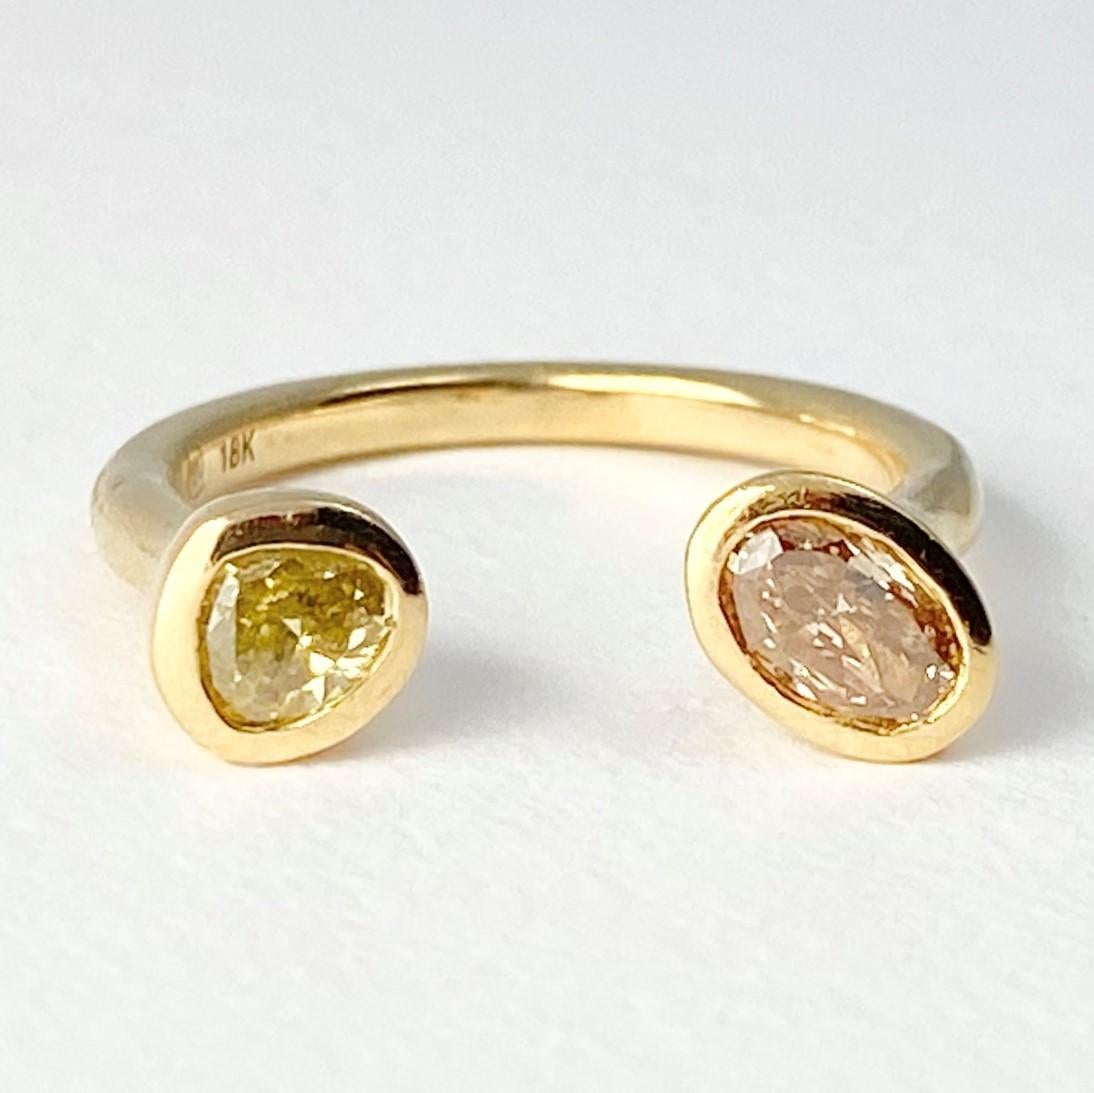 The Leap of Faith ring, from our Barefoot Collection, is the first of Debra's designs. Individually hand-crafted with 18-karat recycled yellow gold, and showcasing two bezel set, colored diamonds (one oval shape, and one pear). The space between the